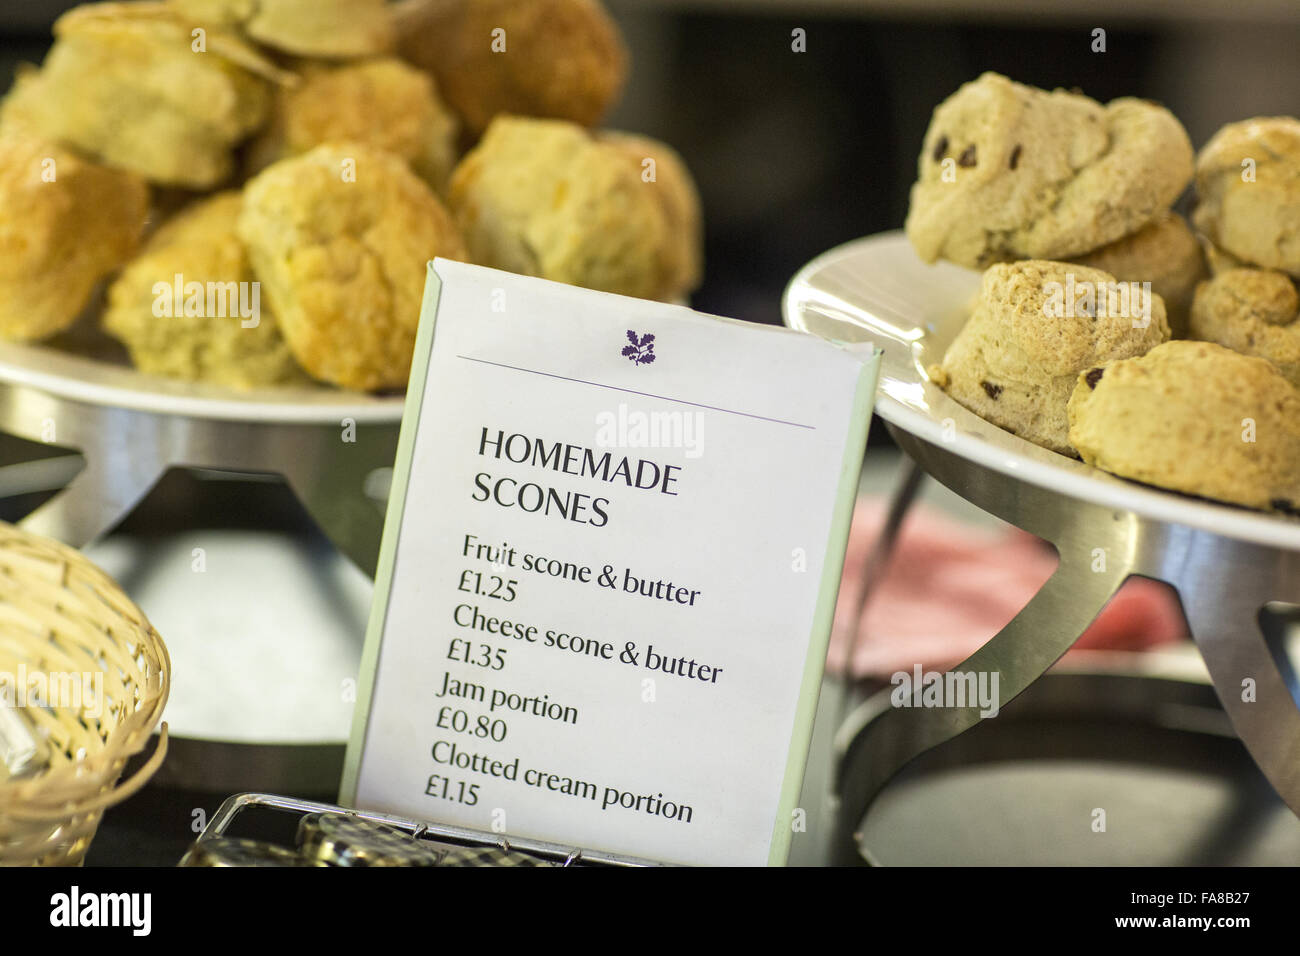 Homemade scones for sale in the Mote Restaurant at Ightham Mote, Kent. Ightham Mote is a medieval moated manor house near Sevenoaks. Stock Photo